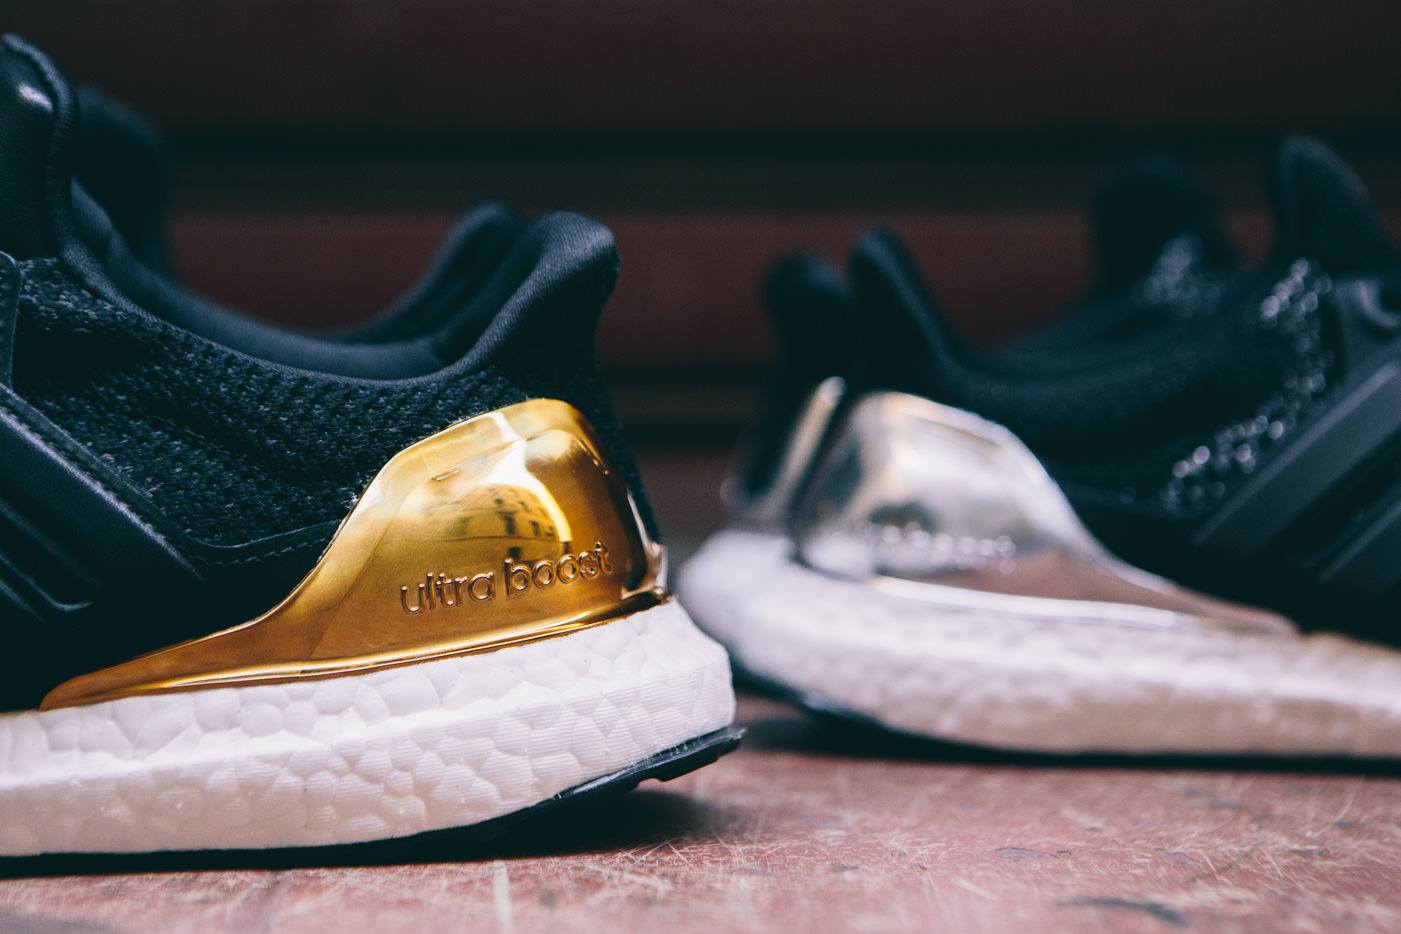 ultra boost medal gold